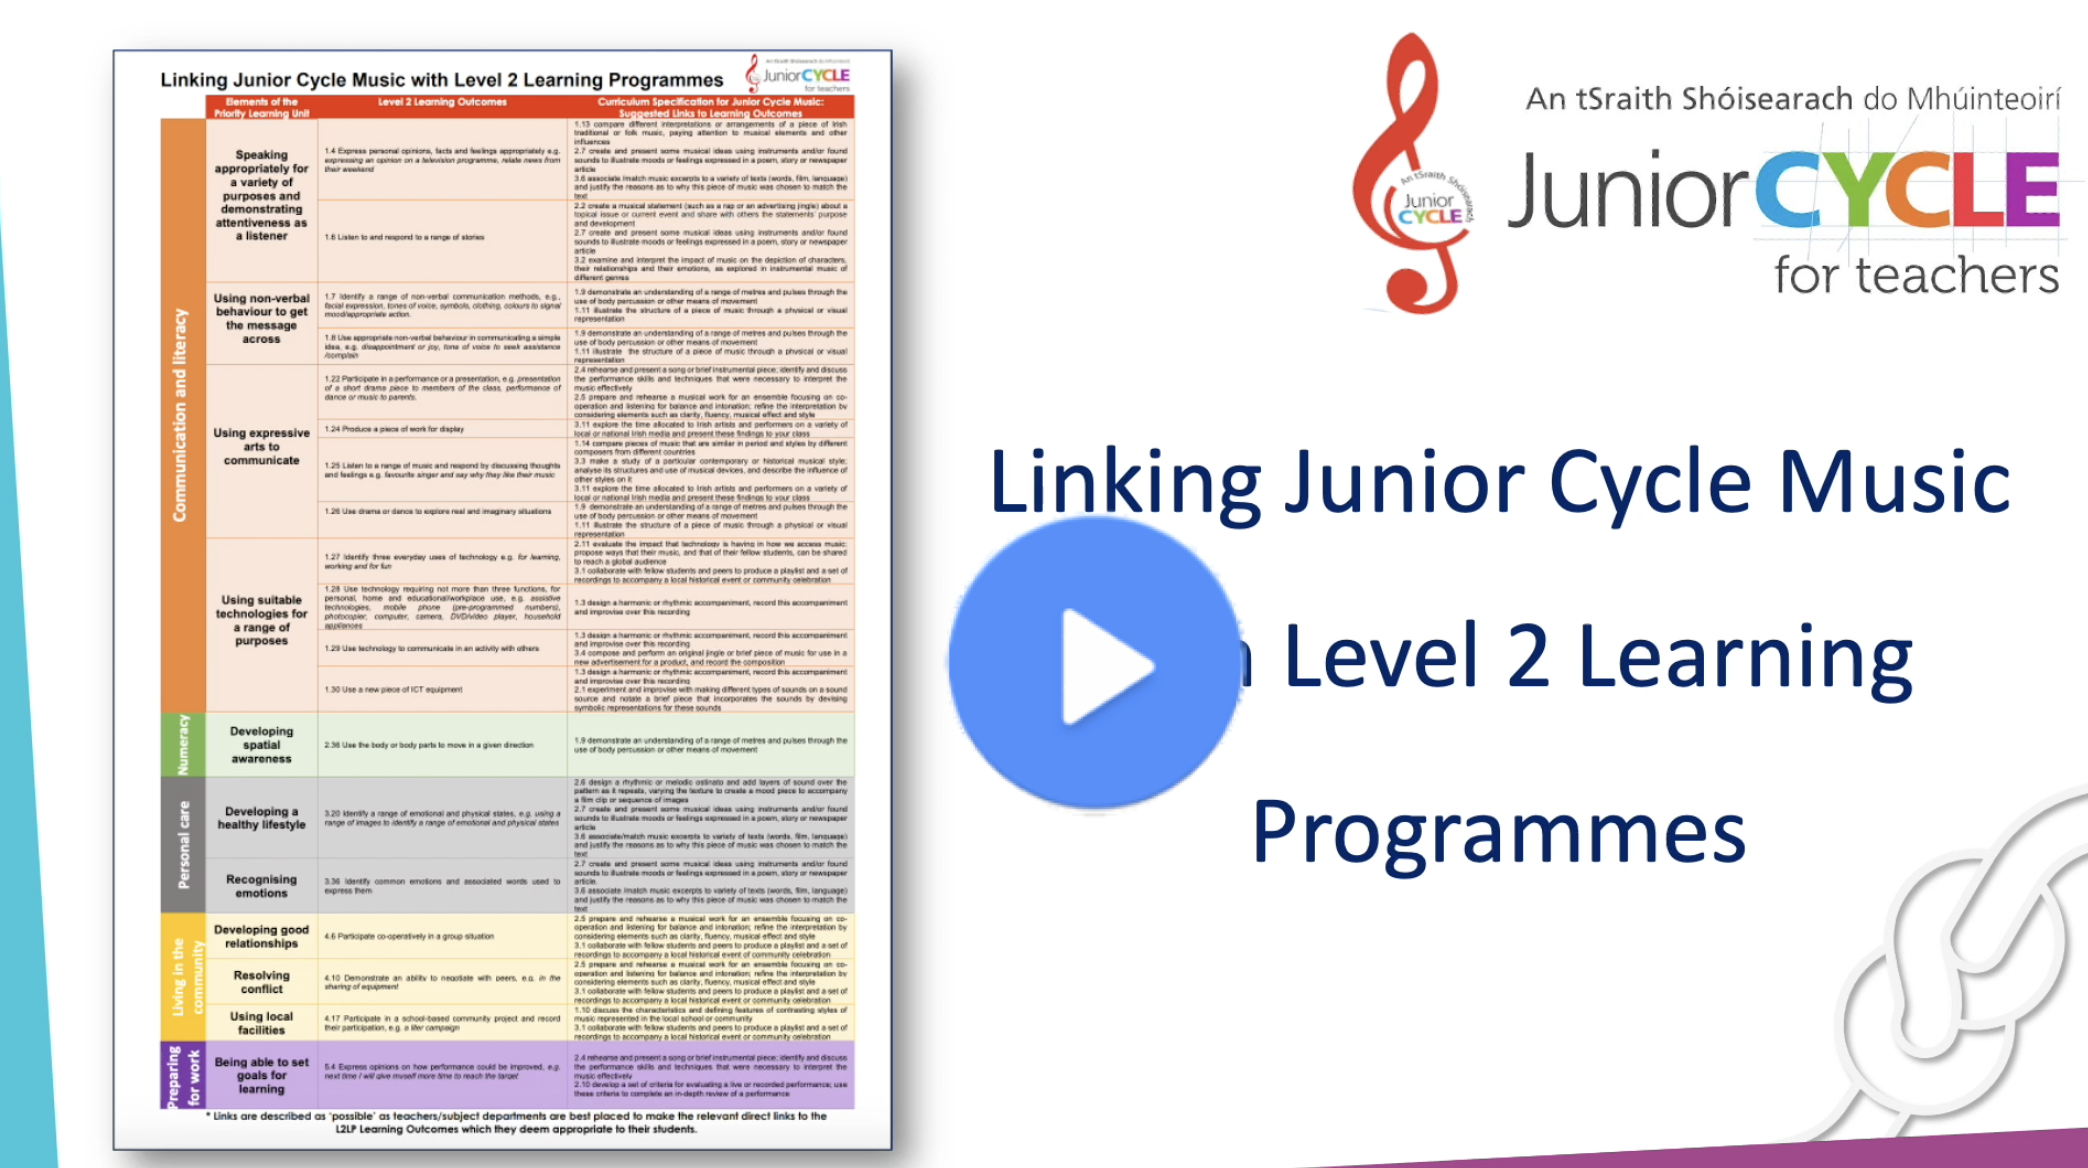 Link to 2 Learning Programmes Poster EXPLAINED